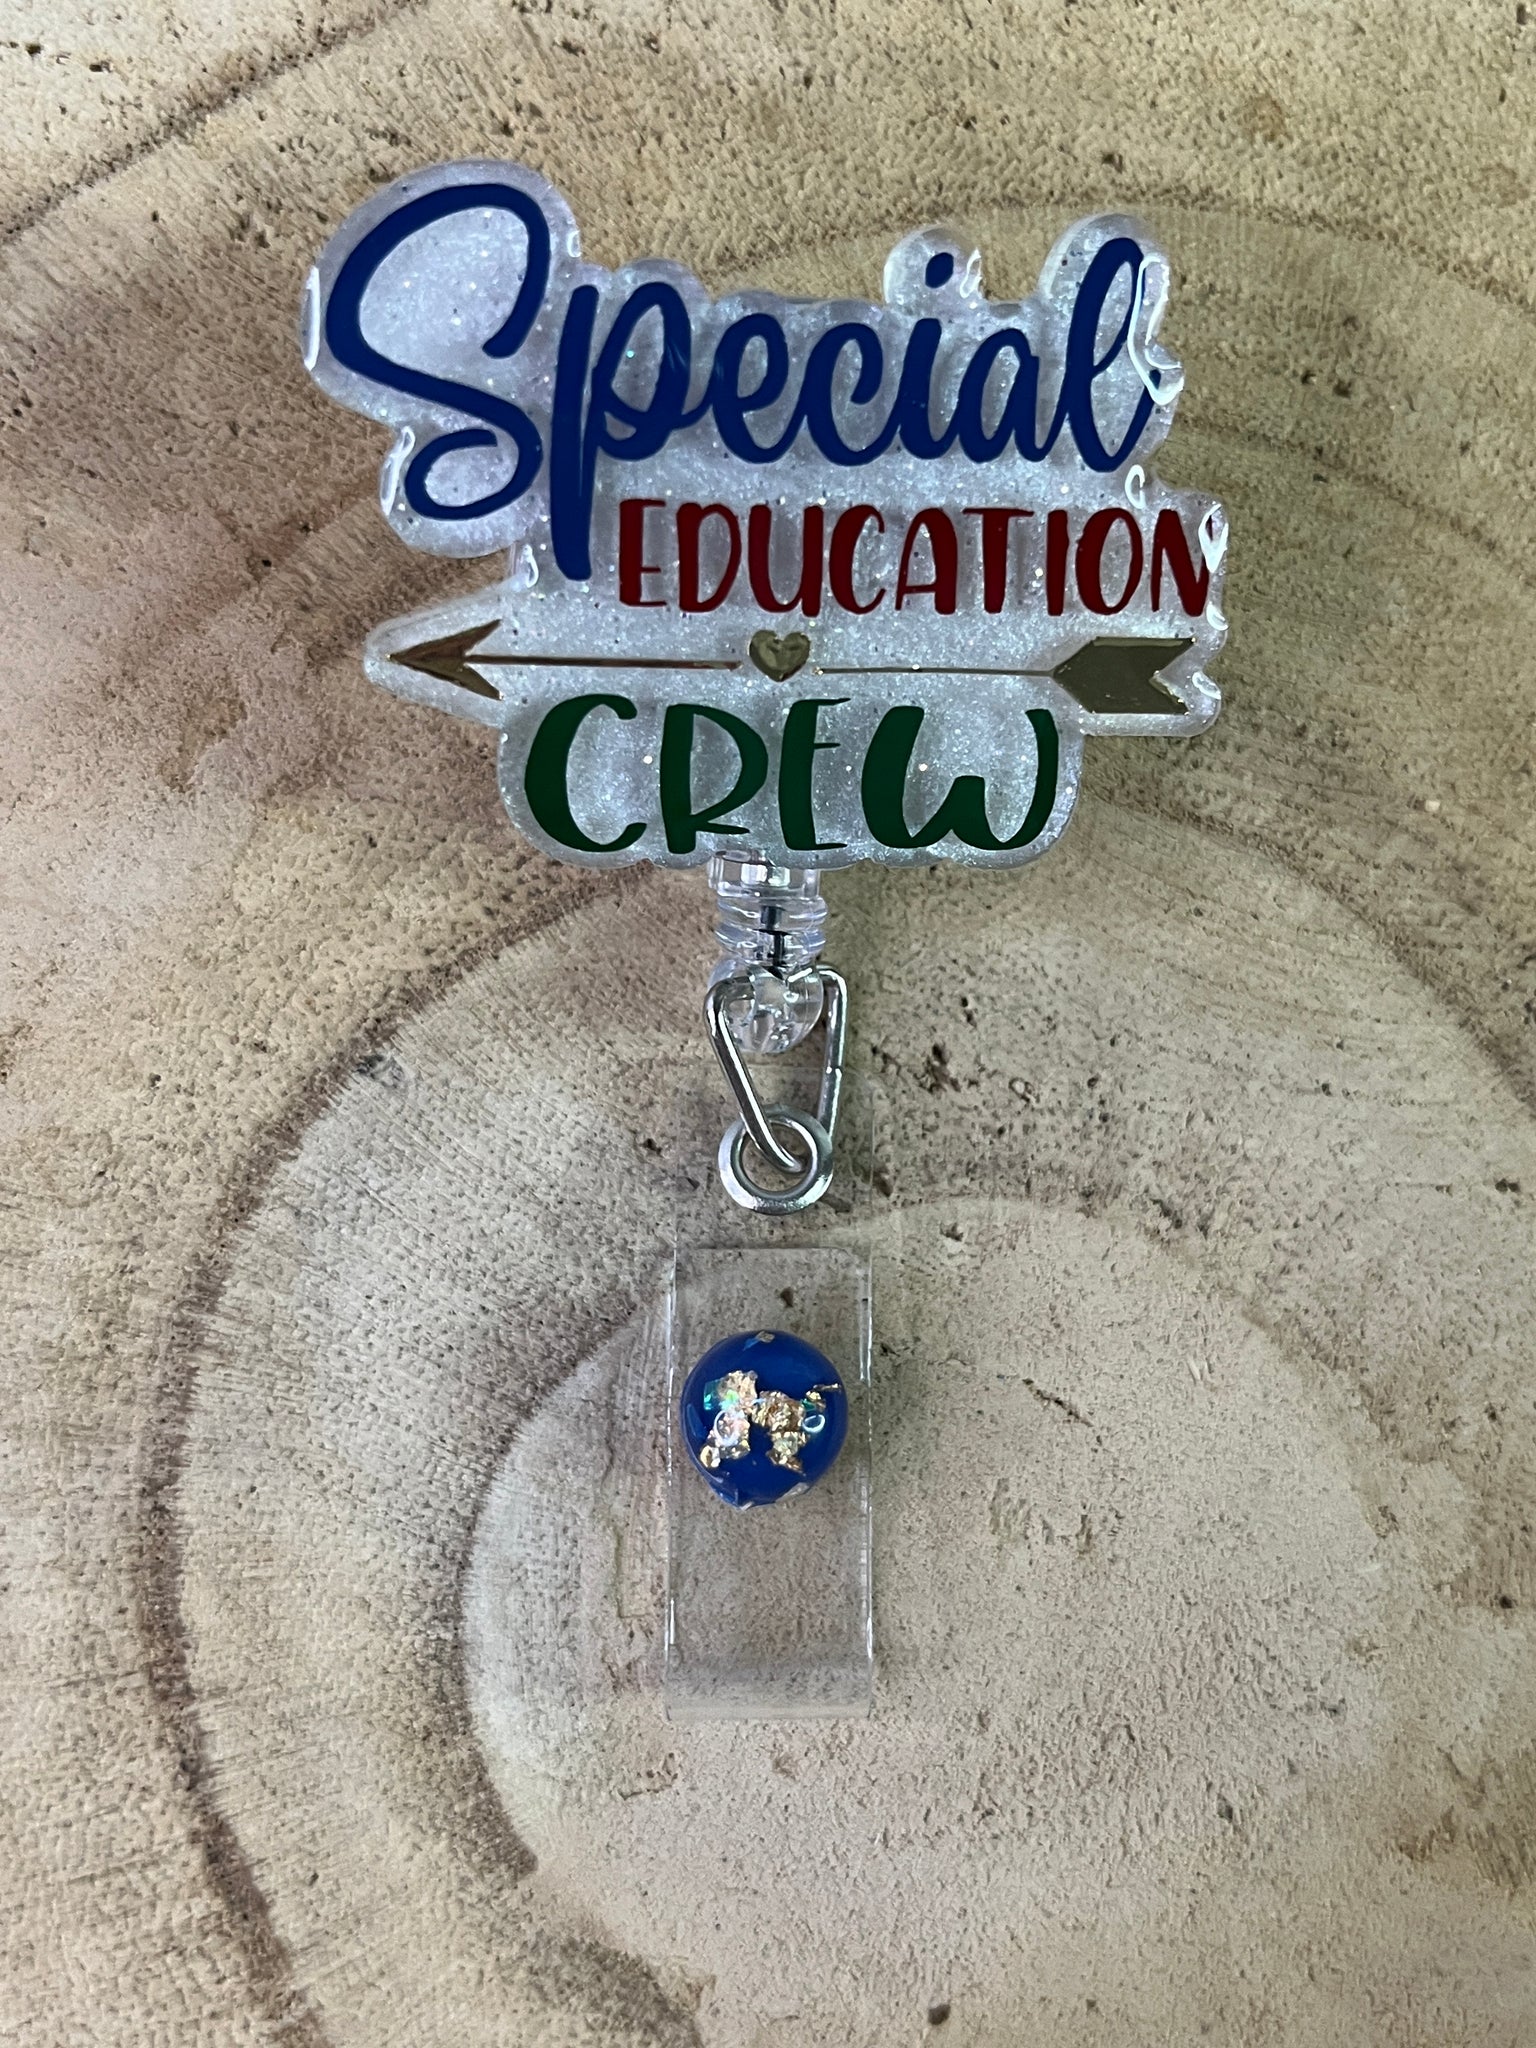 Special Education Crew – MidwestHobbyHouse